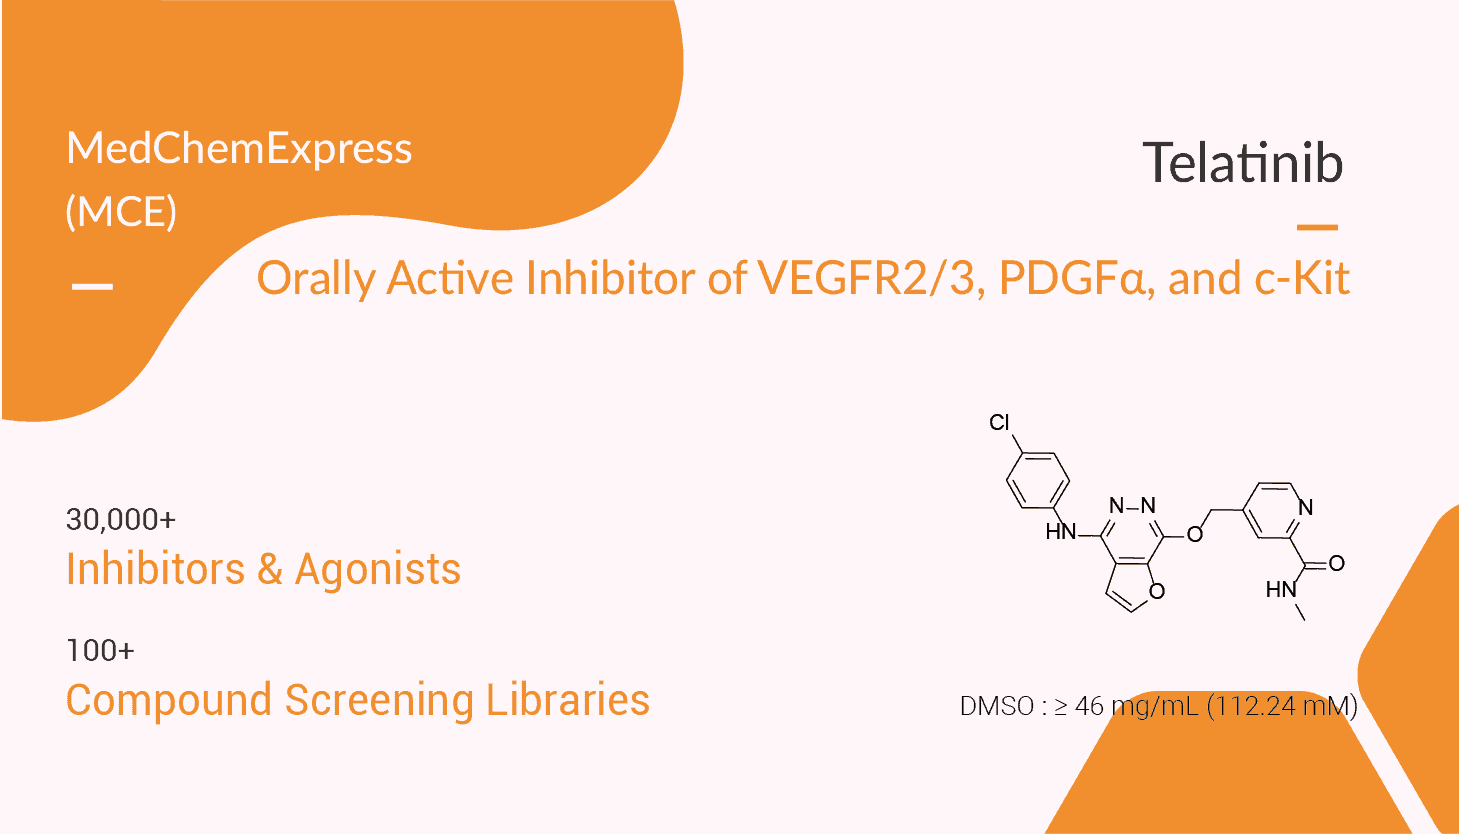 Telatinib is an Orally Active Inhibitor of VEGFR2, VEGFR3, PDGFα, and c-Kit